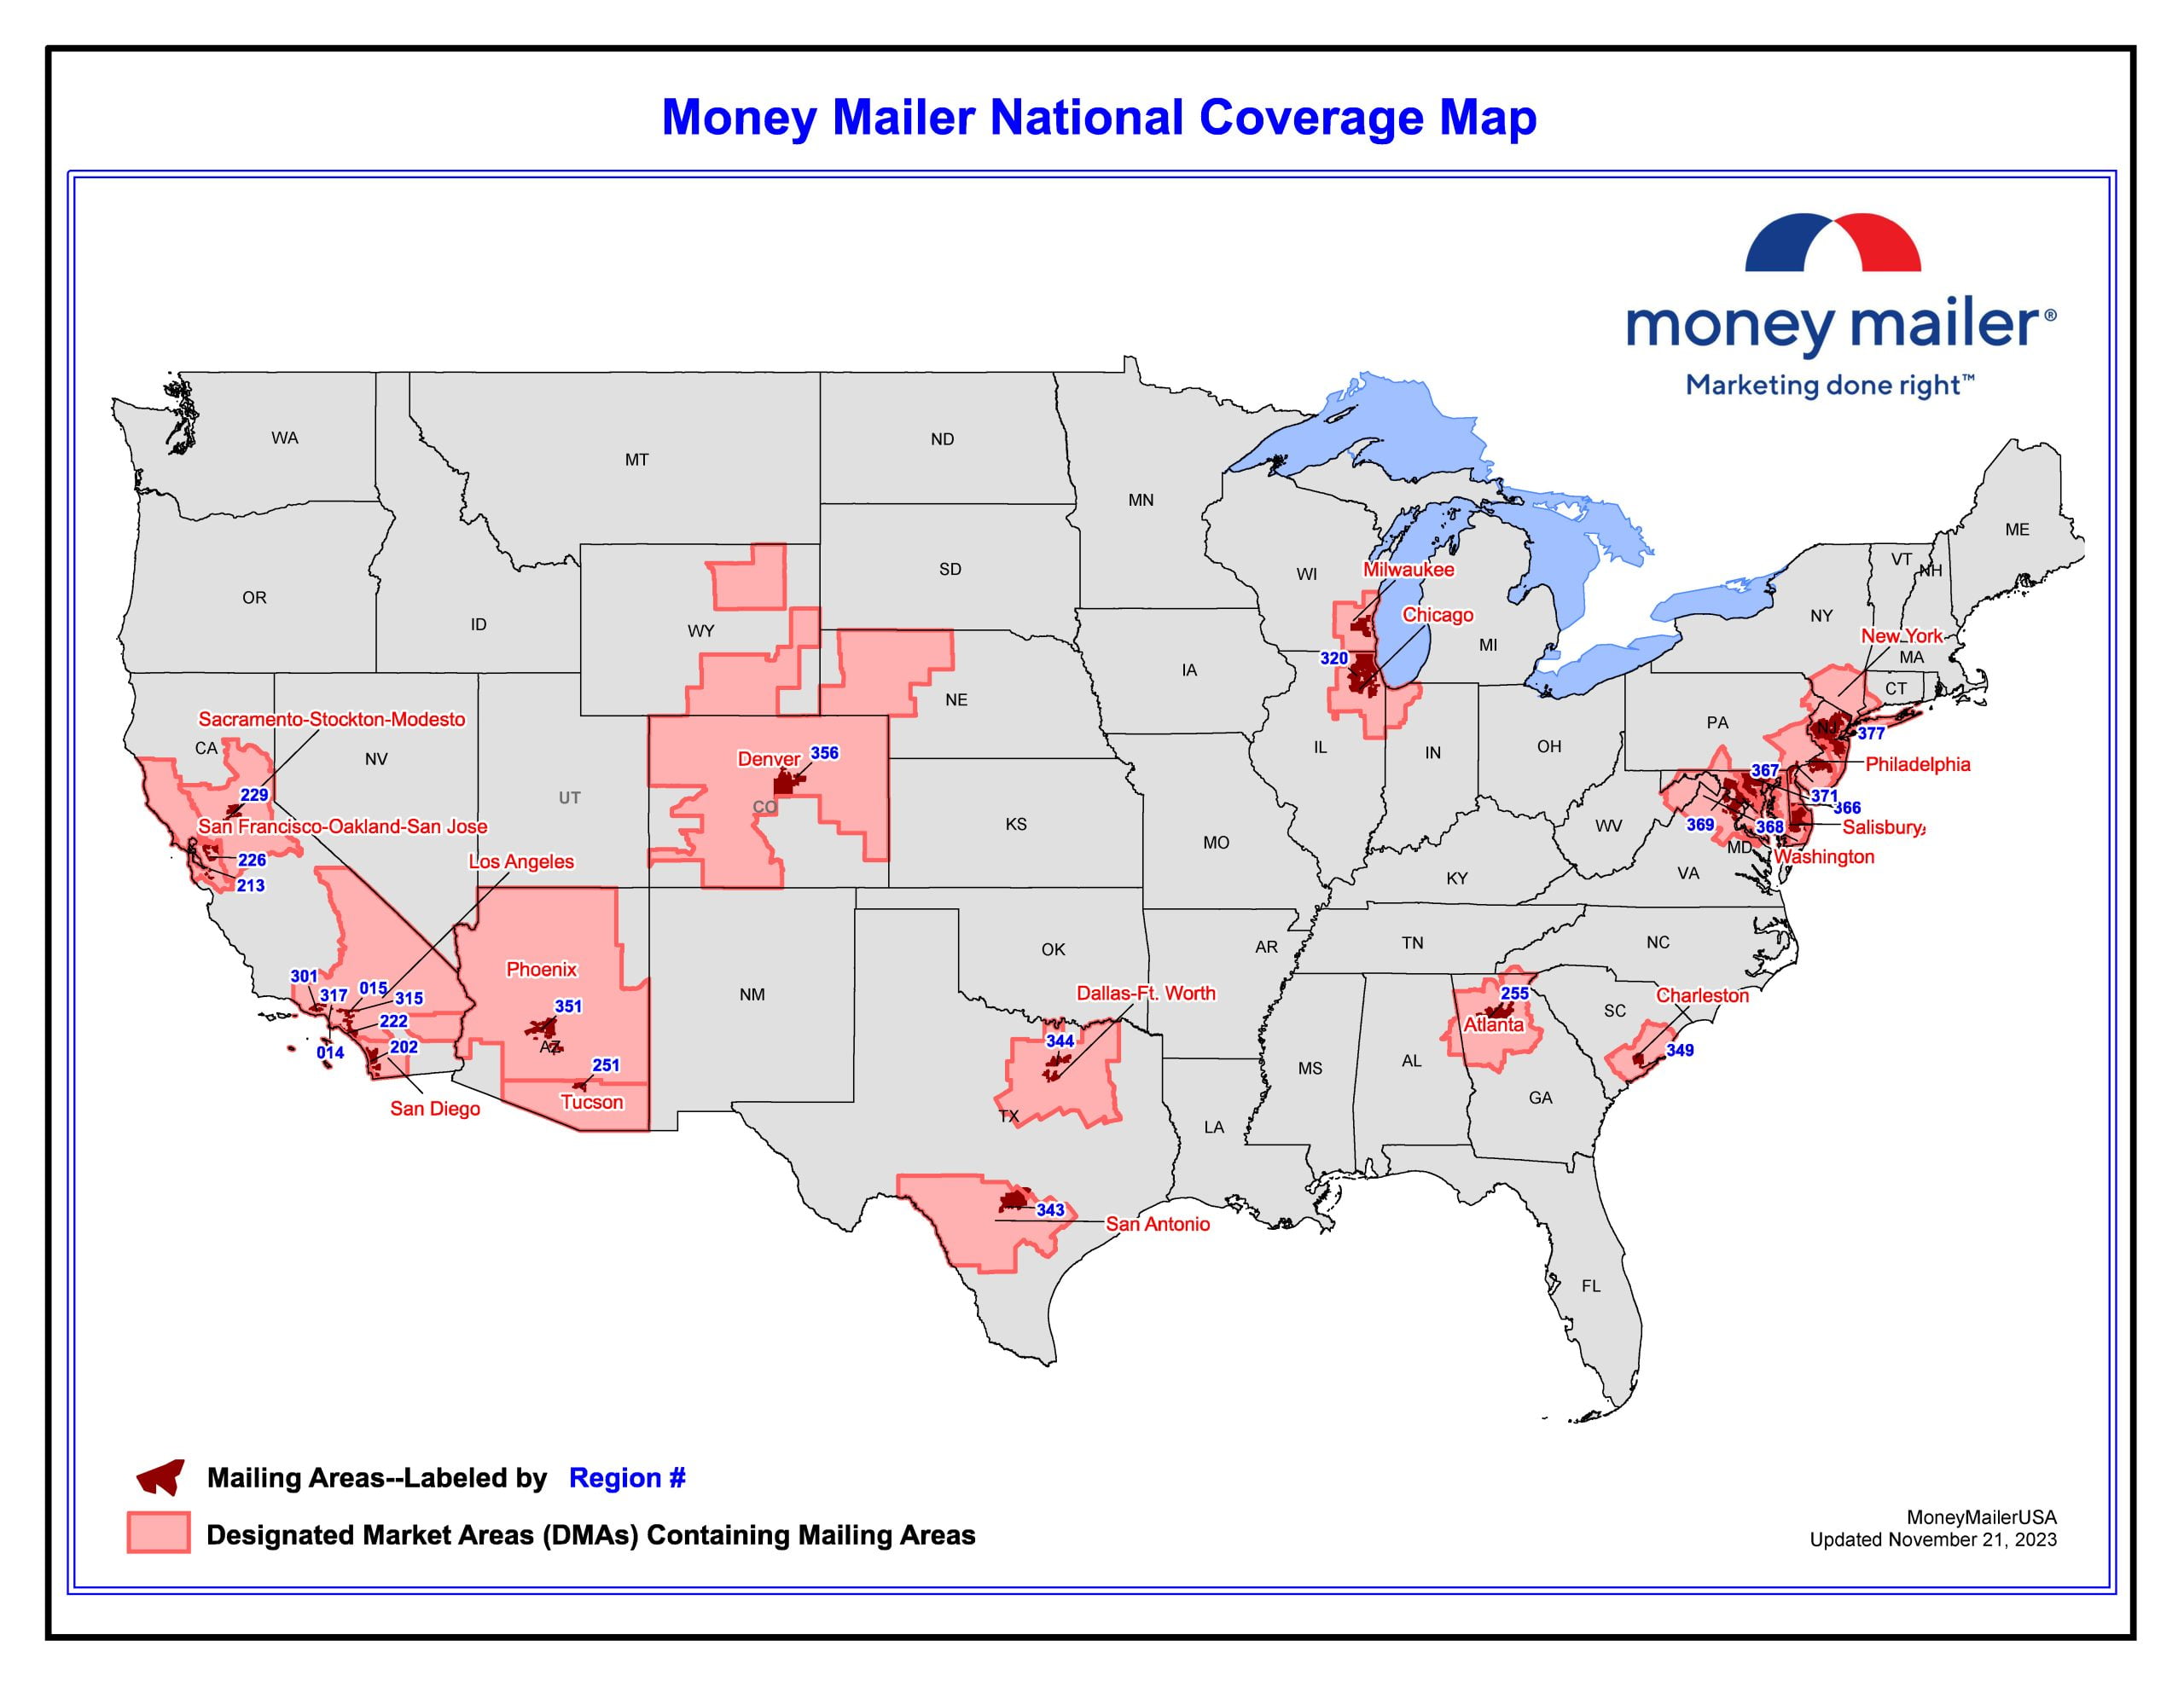 Map of US showing money mailer coverage